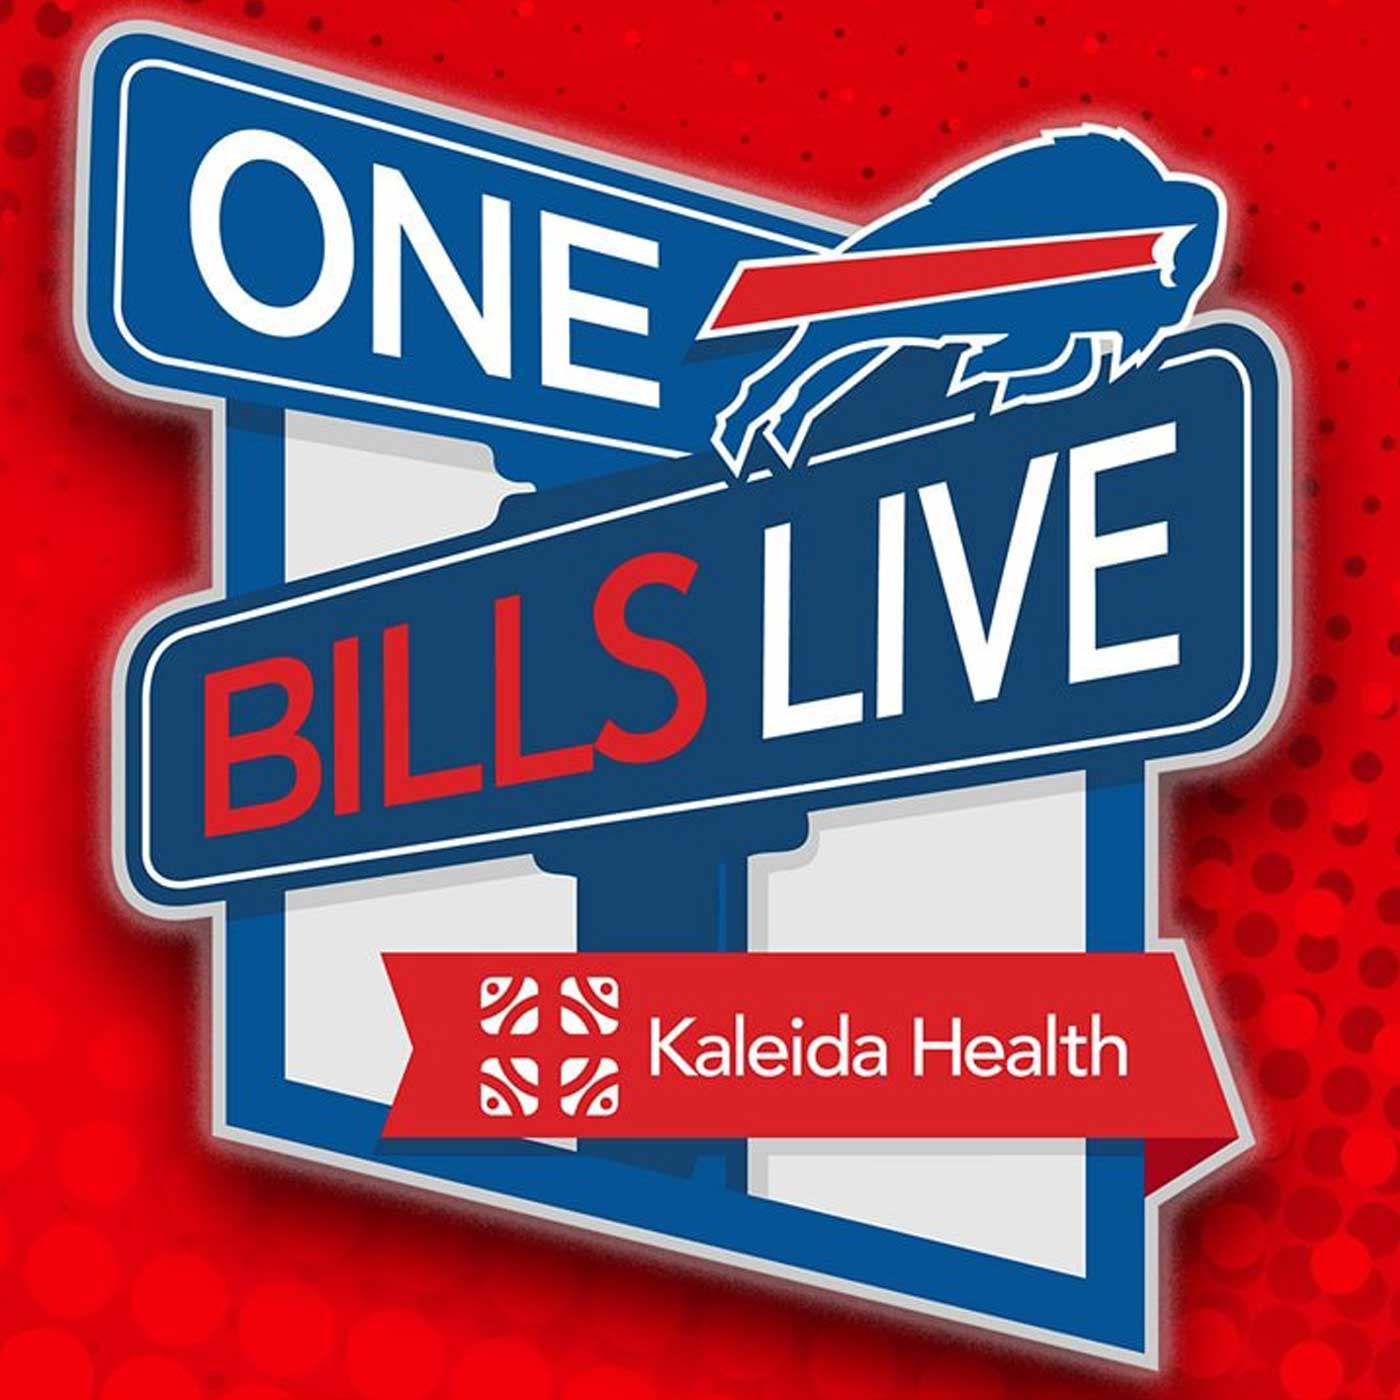 “No One Knows How Good I Could Be” | Harrison Phillips Joins One Bills Live